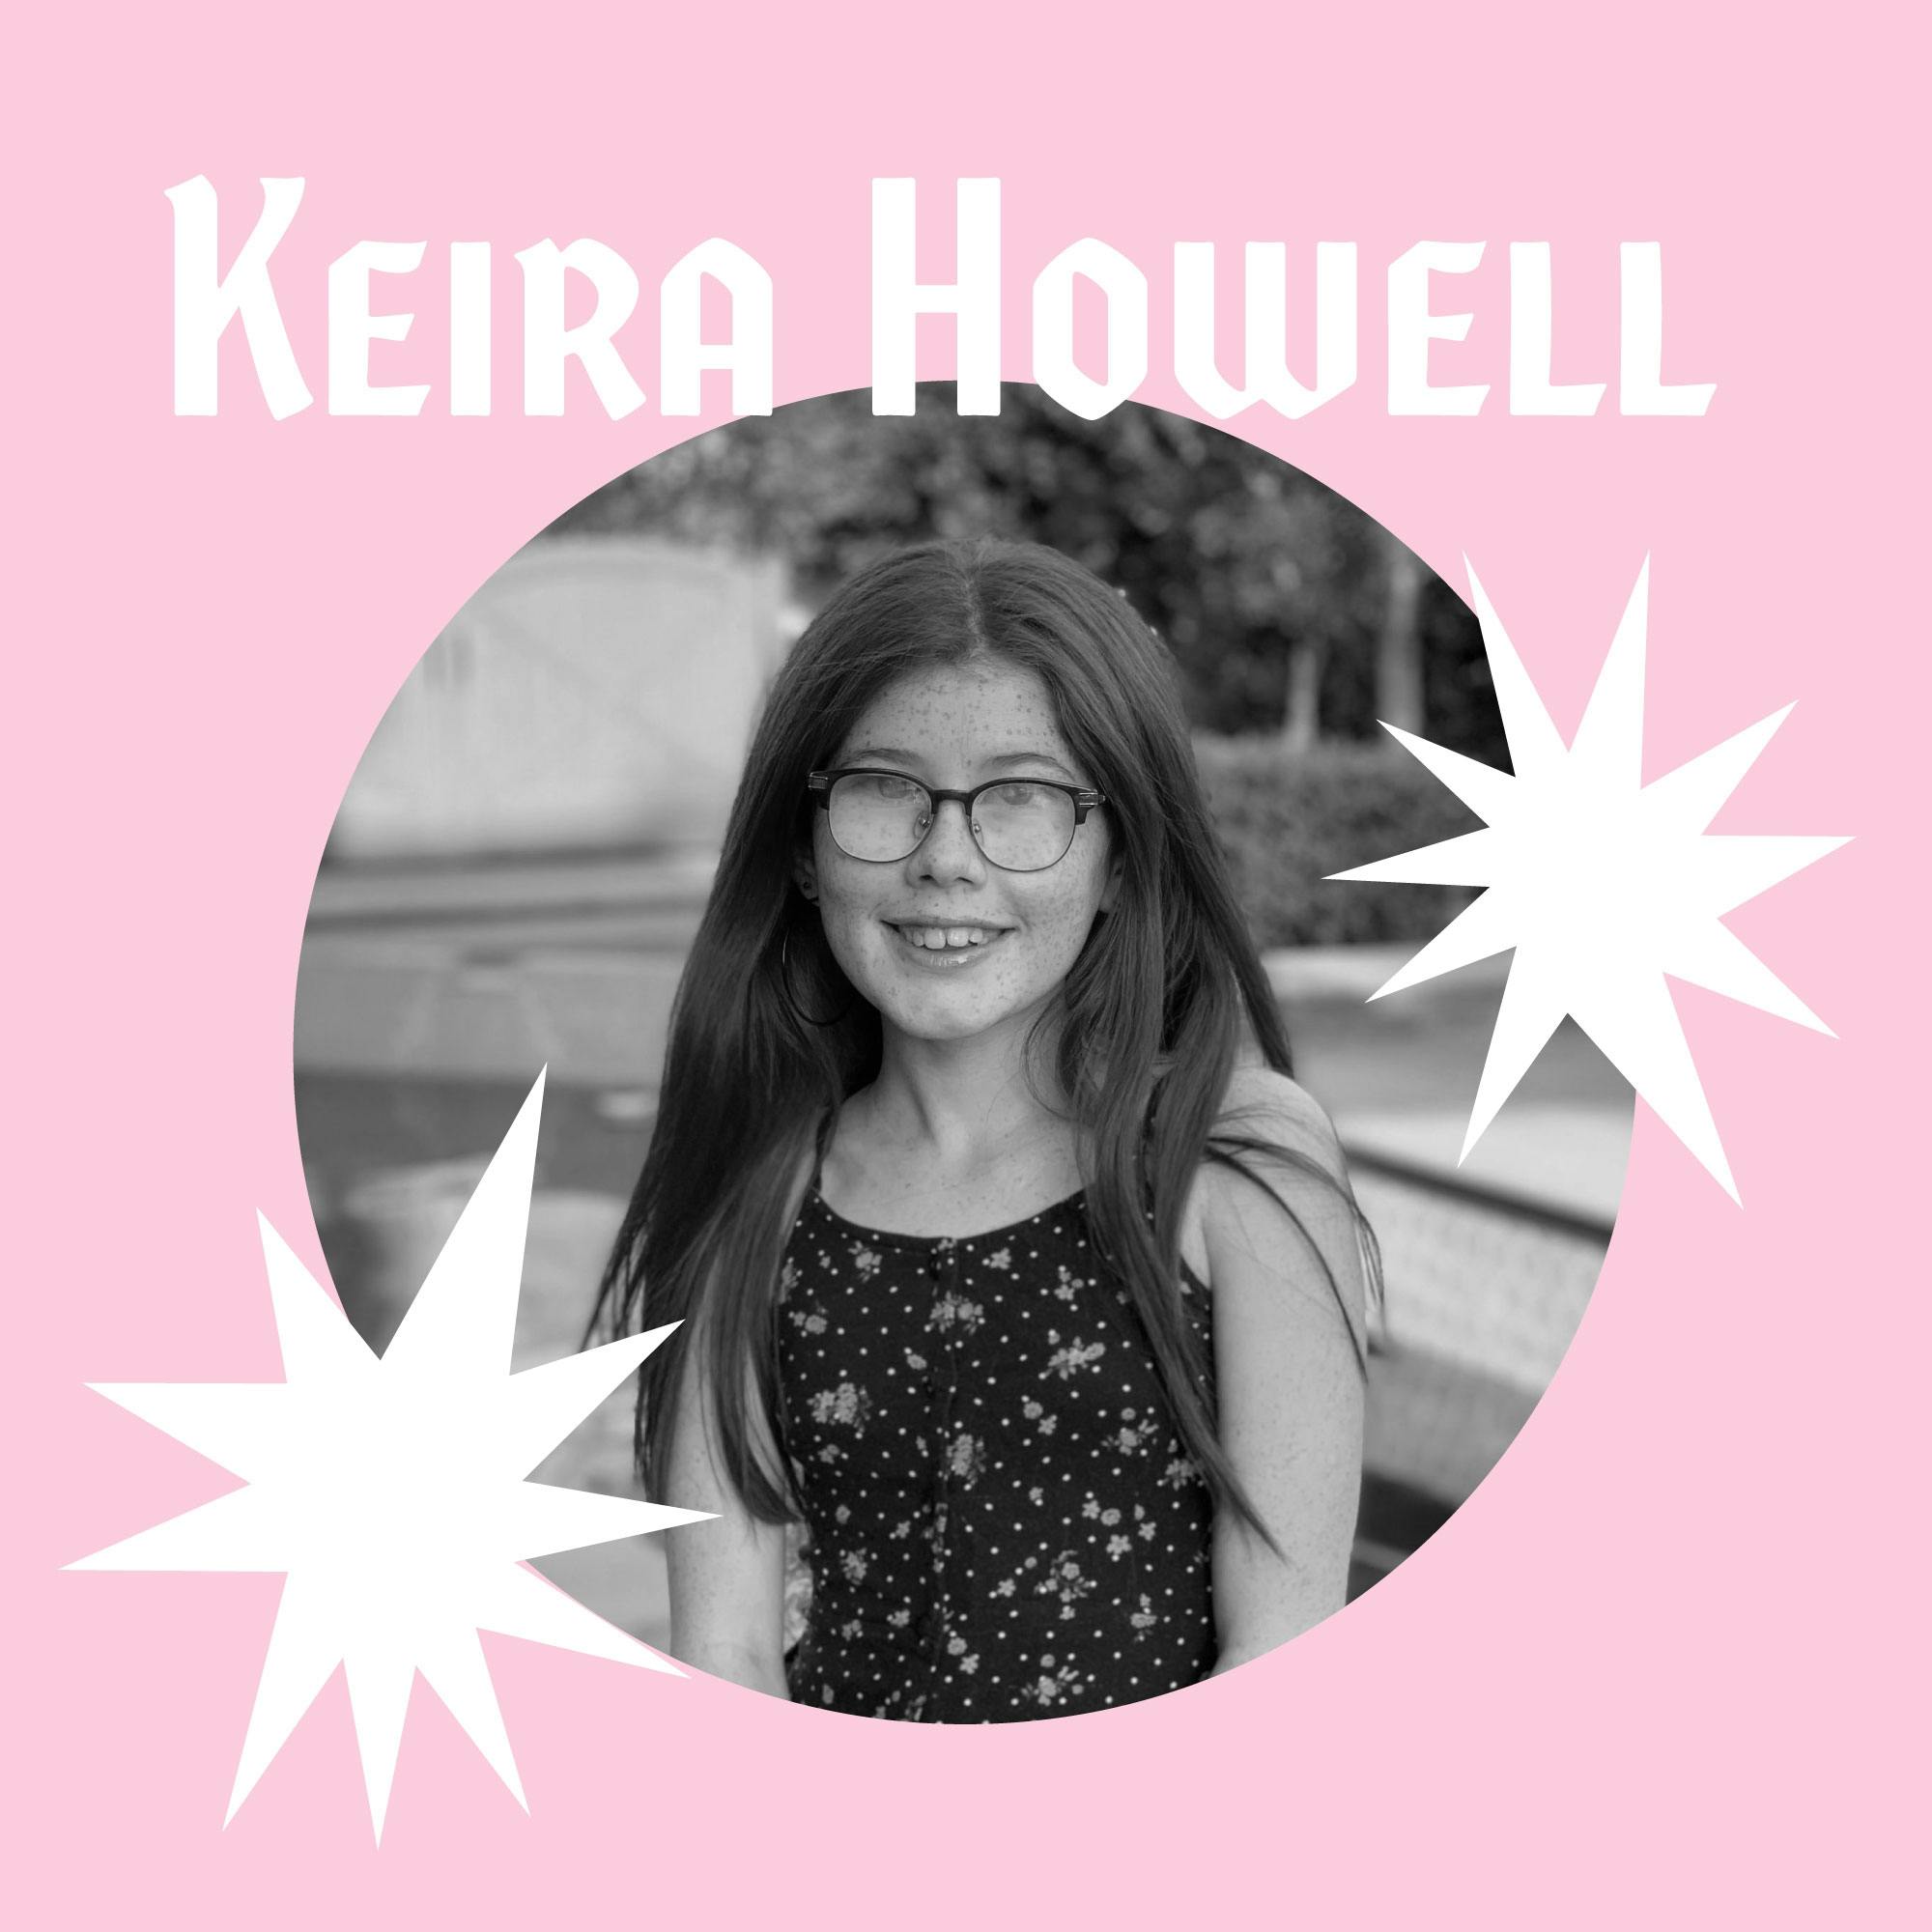 Advocates Come in Small Packages – My Life with Blau Syndrome with Keira Howell